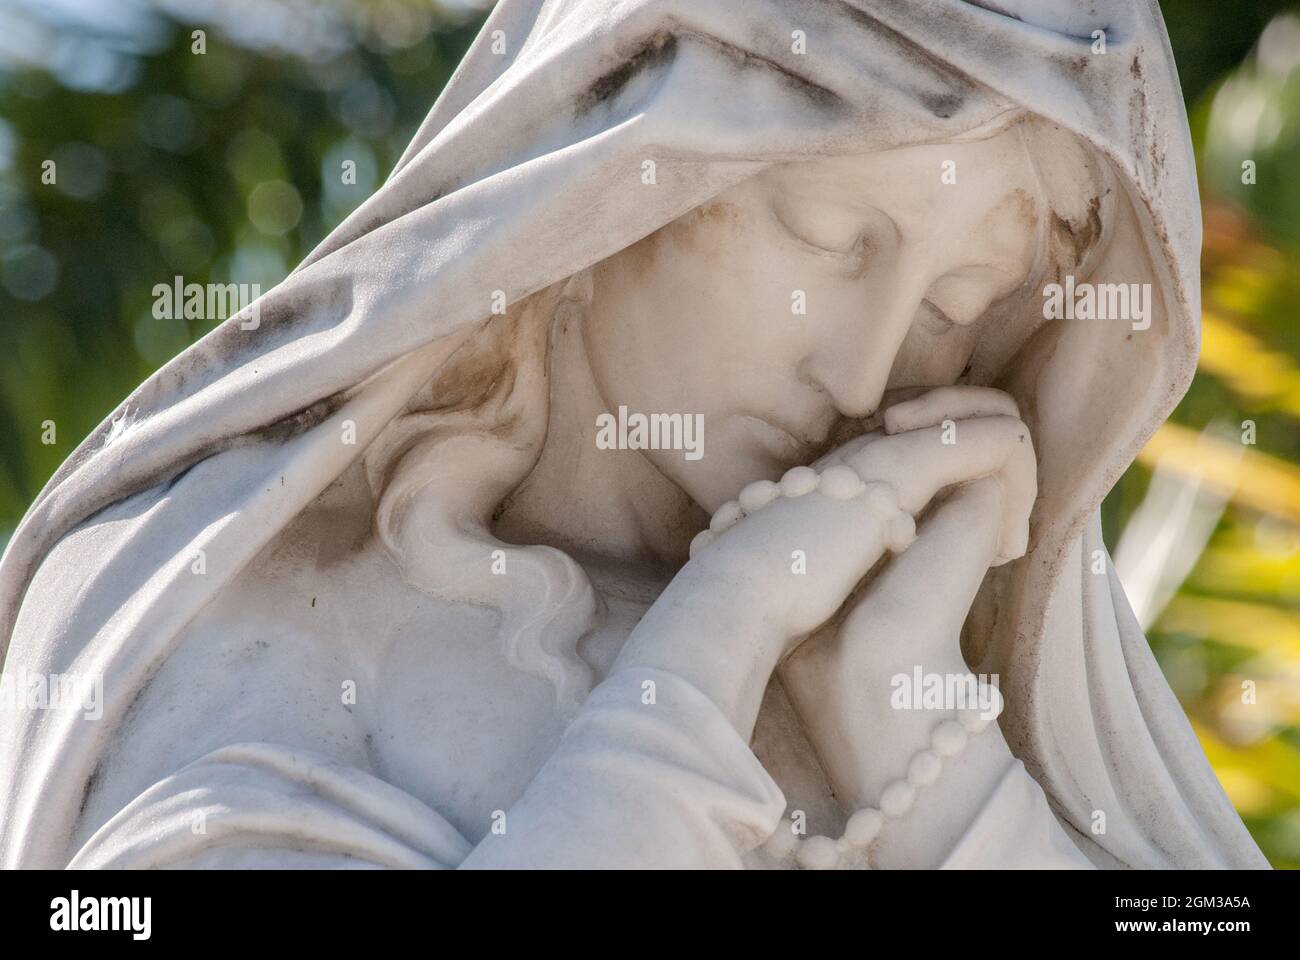 Madonna sculpture, Cuba, monuments, marble, mary, church, stone, sacred, architecture,angels, religious, ancient, memorial, emblem, pray, cemetery Stock Photo